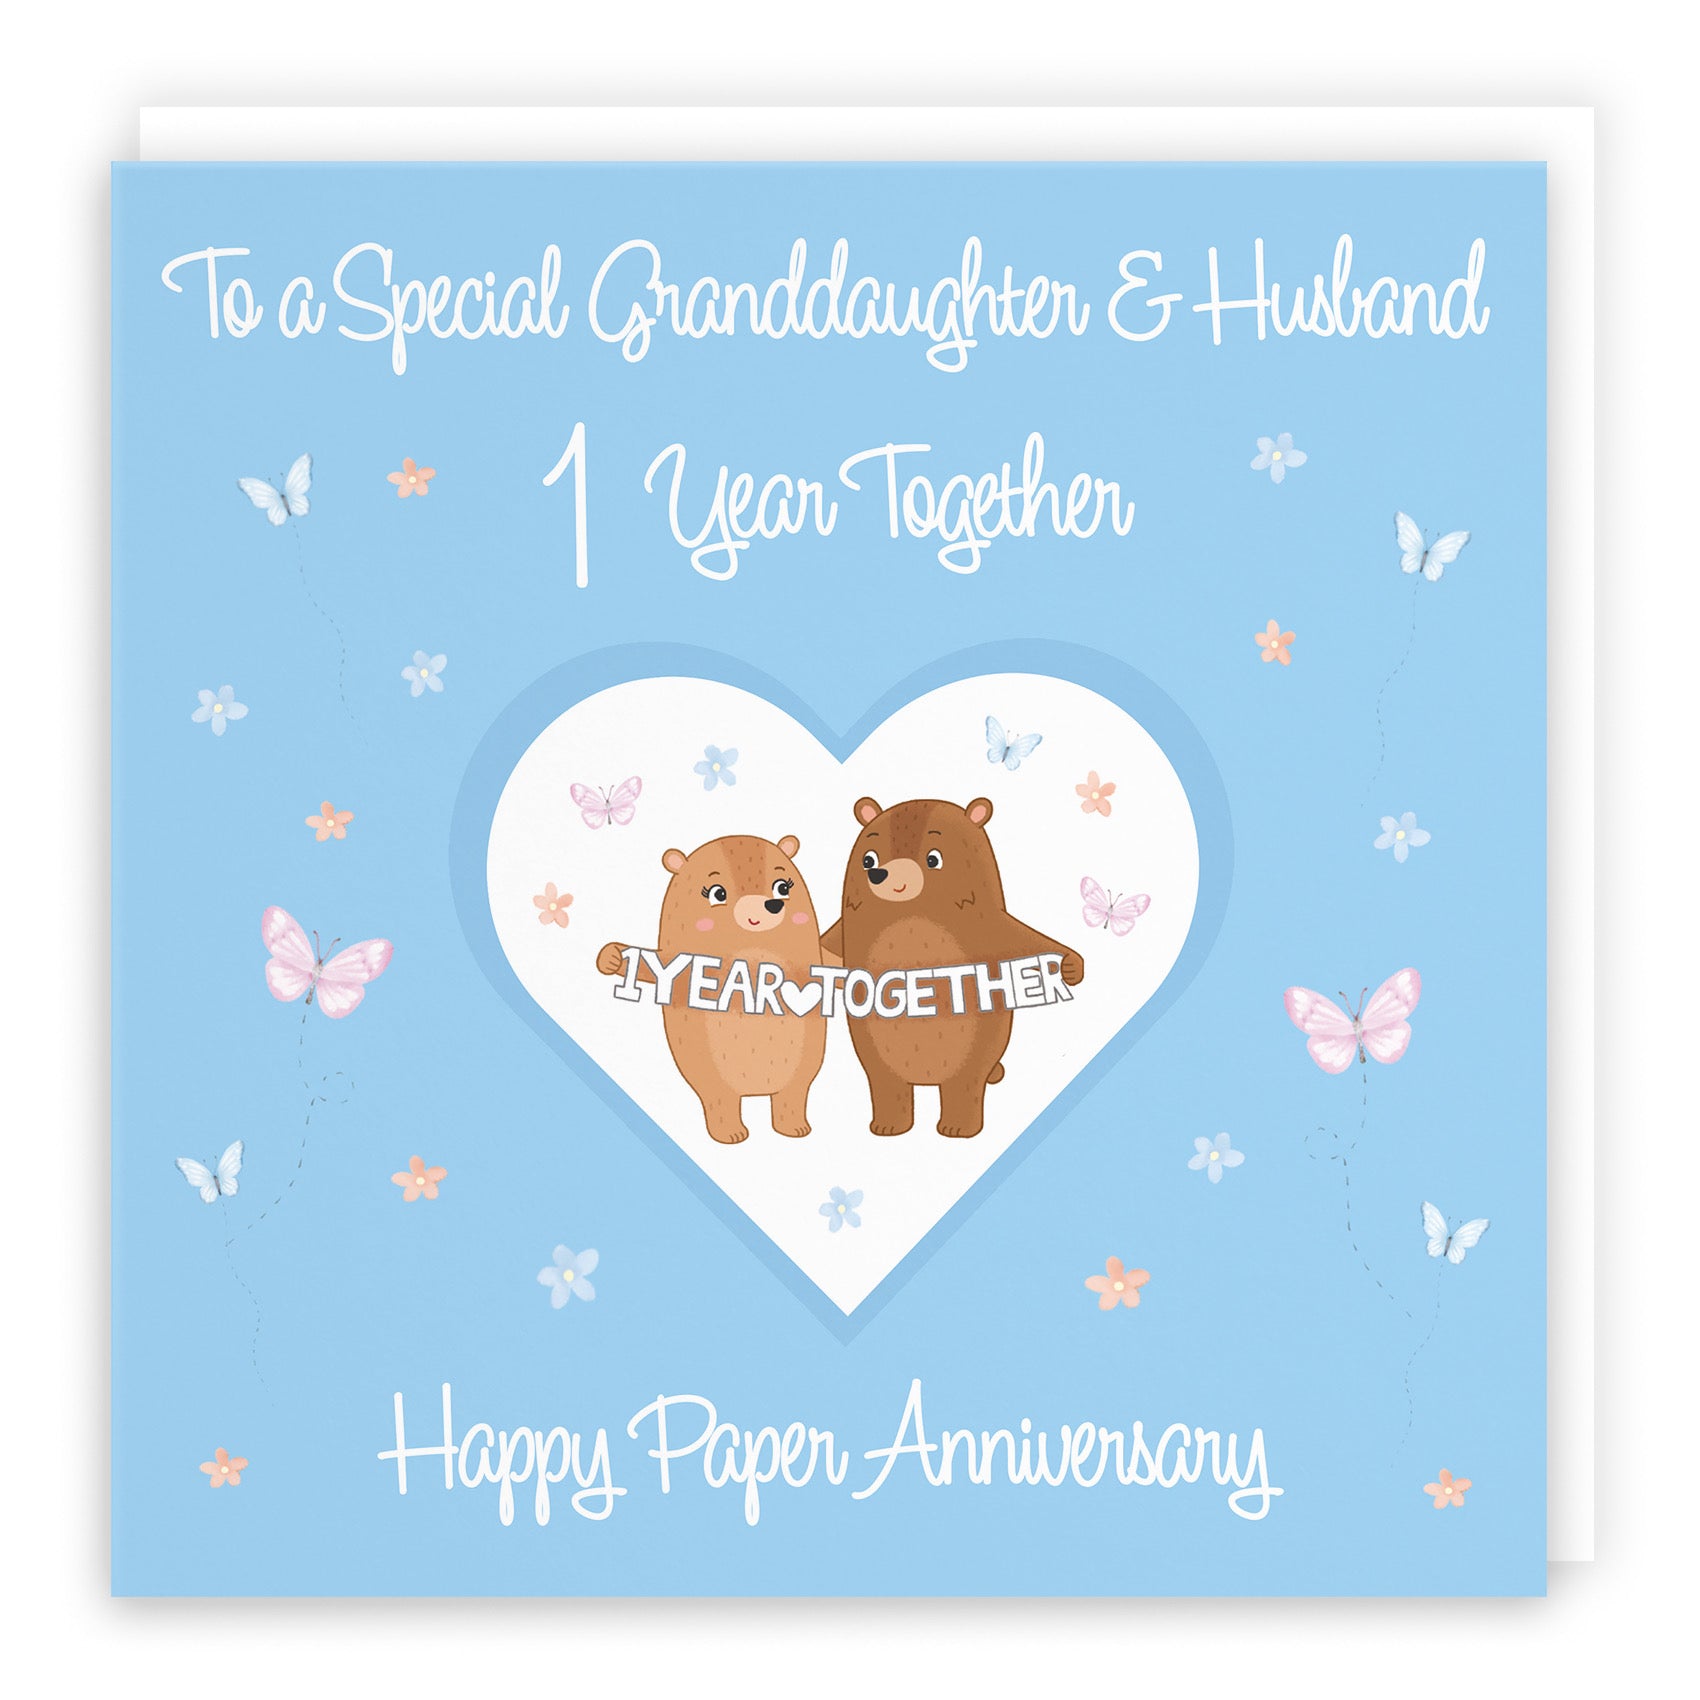 Large Granddaughter & Husband 1st Anniversary Card Romantic Meadows - Default Title (B0CXY3W16P)